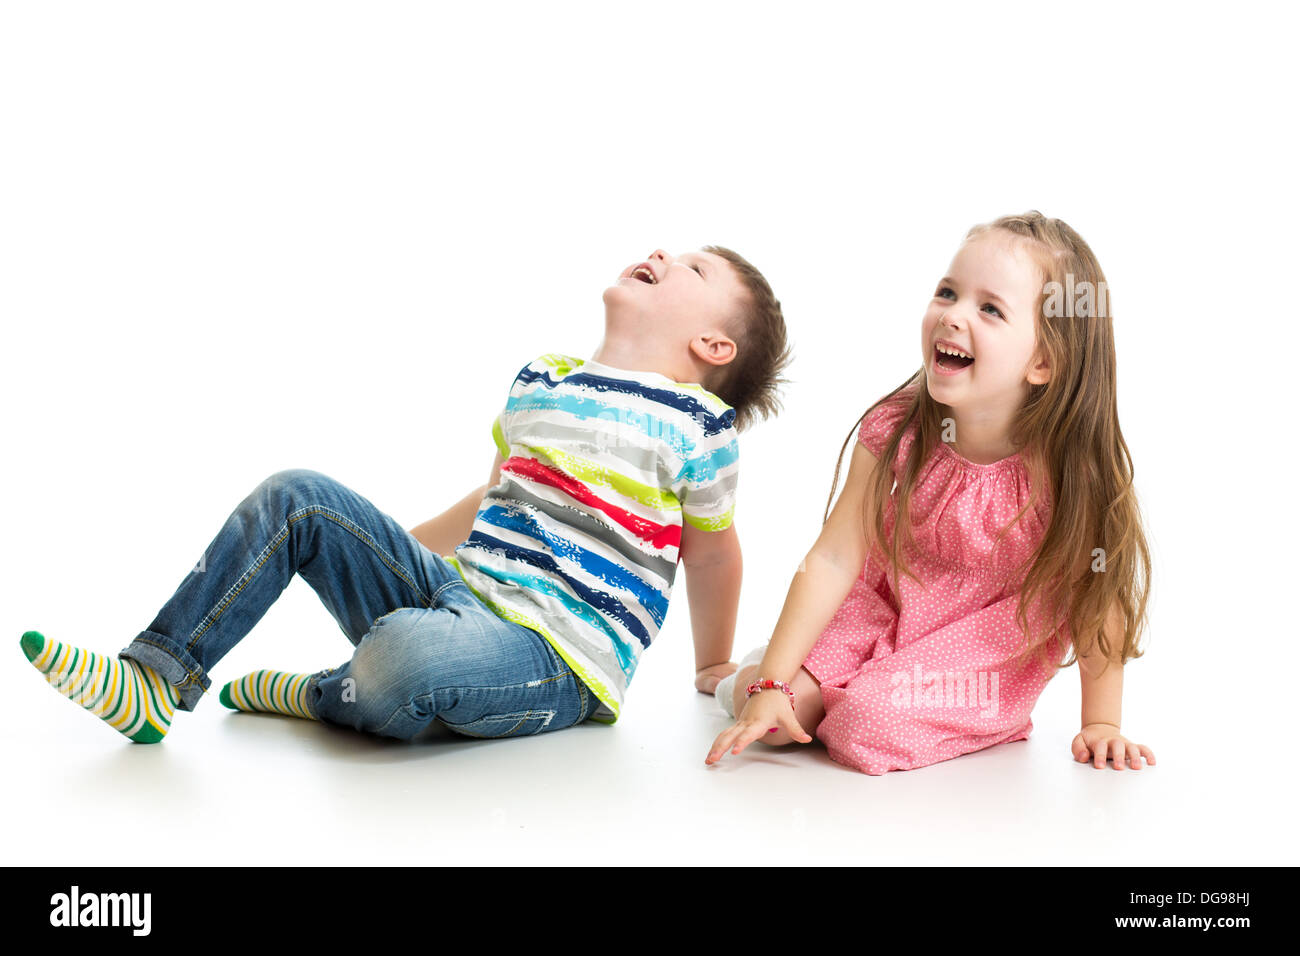 kids boy and girl laughing and looking up Stock Photo